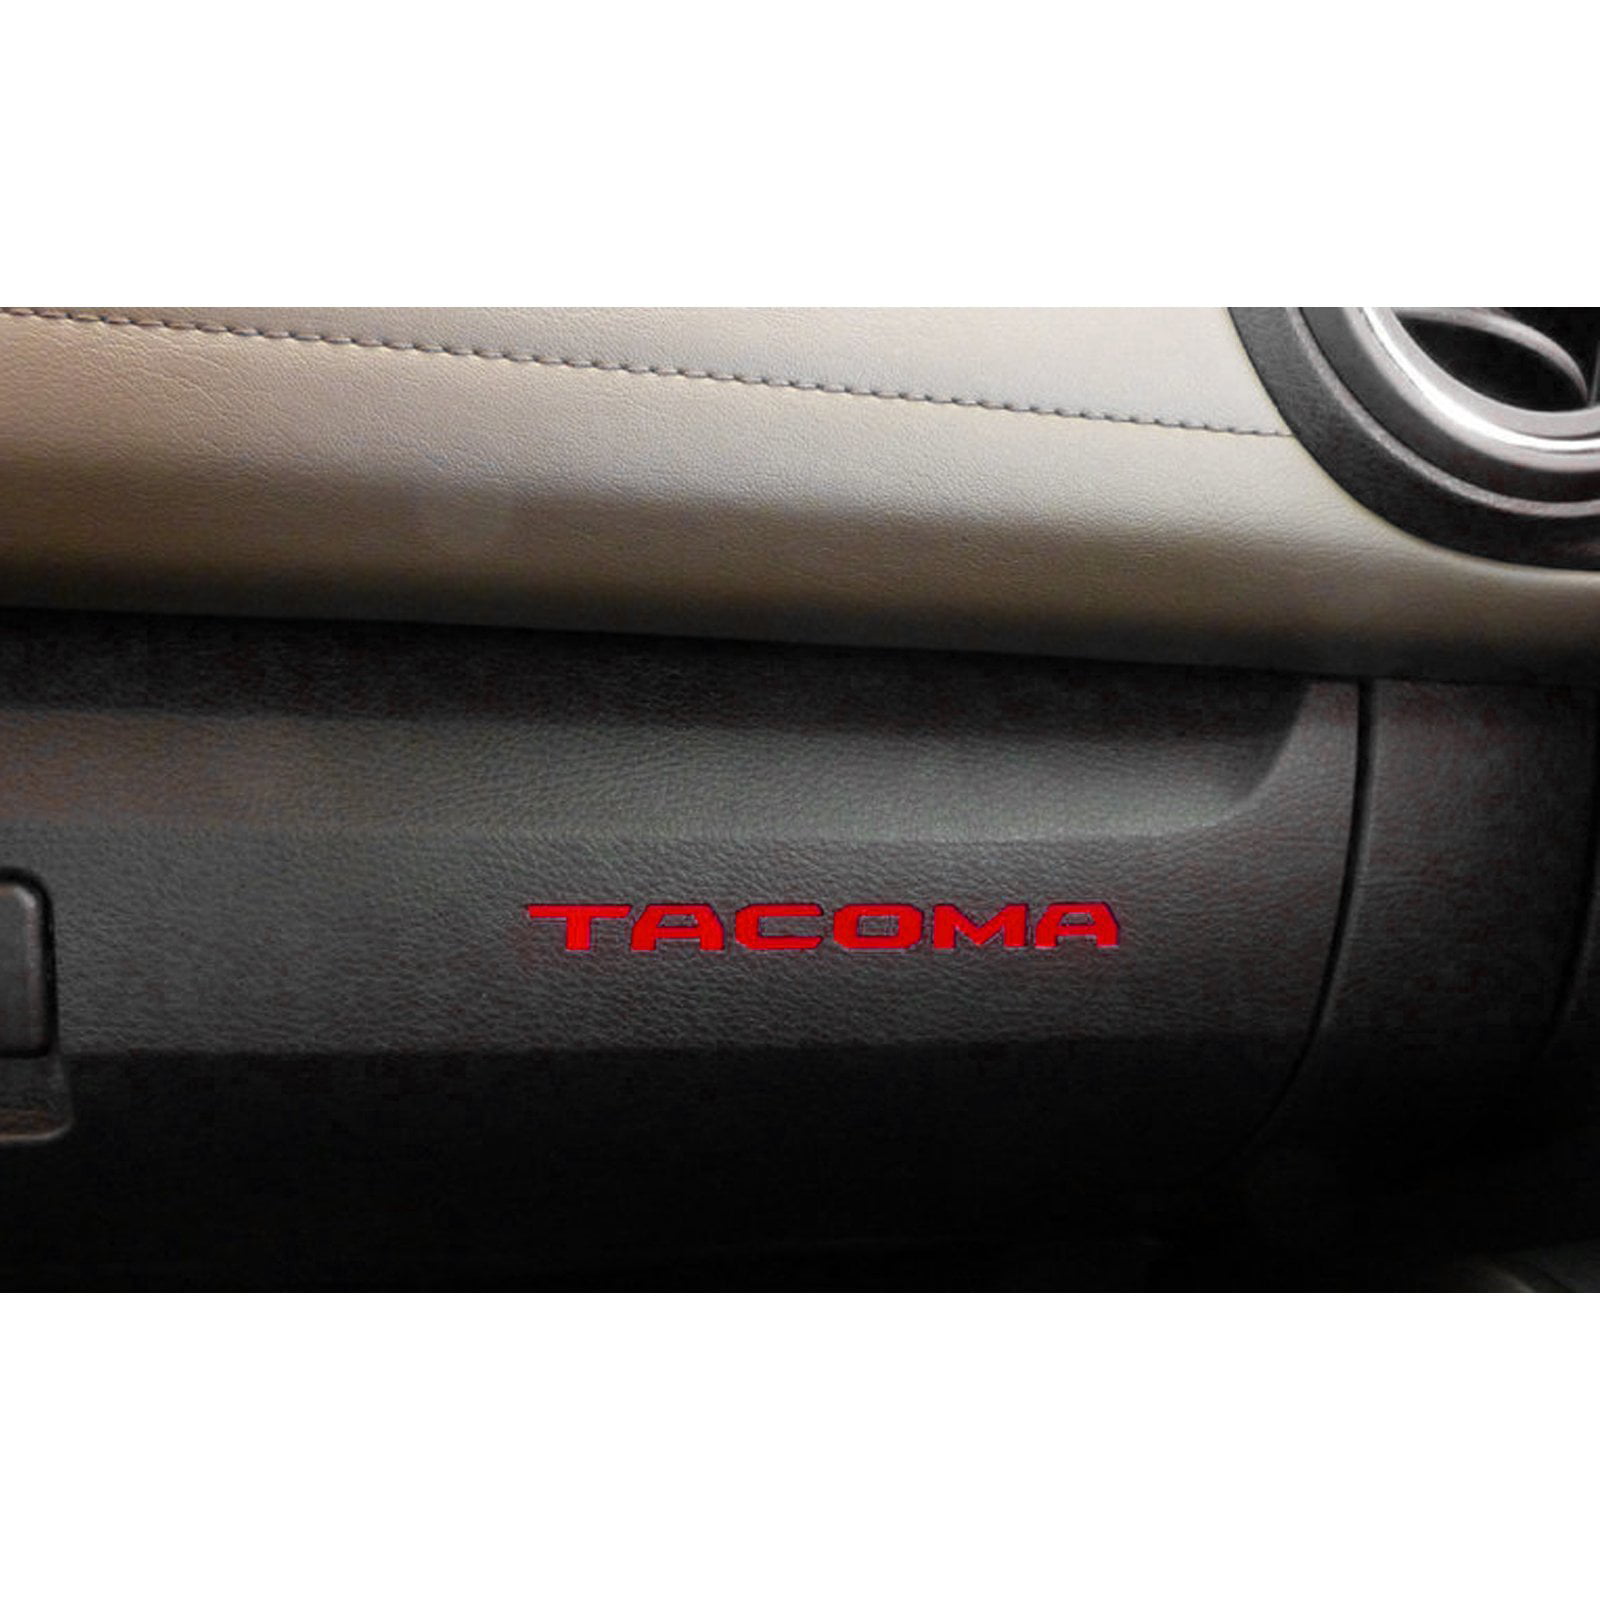 Glove Box Dashboard Letter Insert Decal Sticker Compatible with and Fits Toyota Tacoma 2016 2017 2018 Haru Creative Matte Blue 